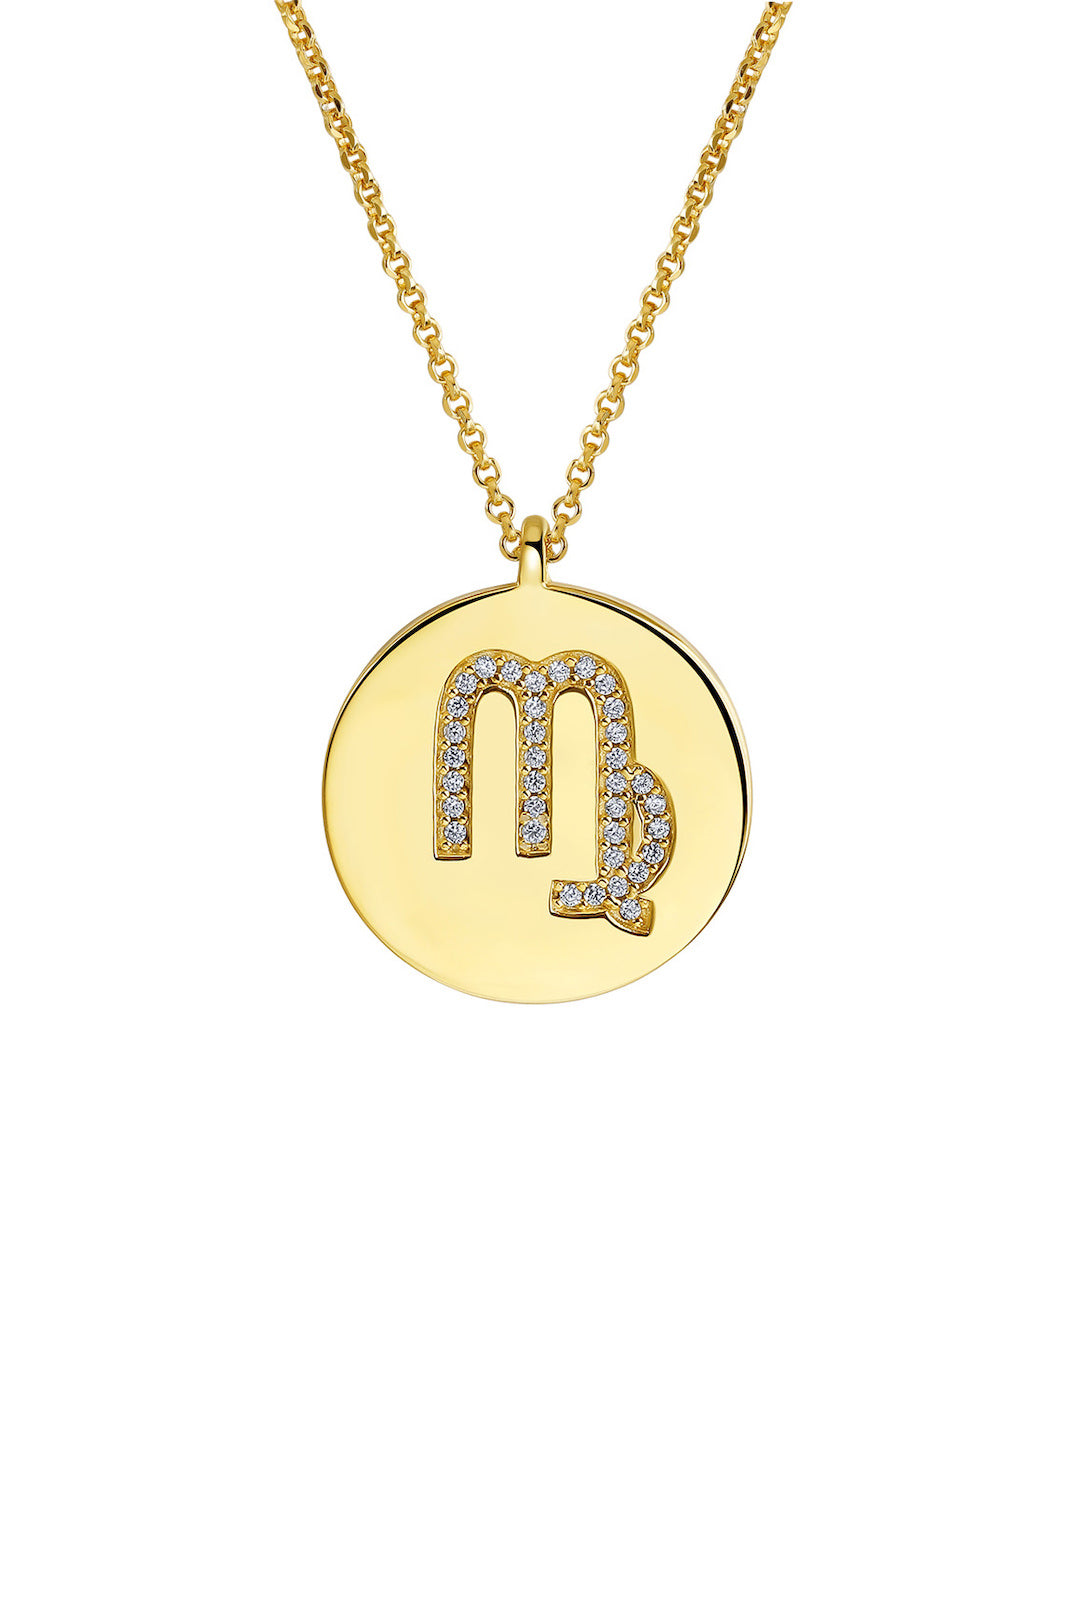 Gold Plated Silver Zodiac Necklace - Virgo Side View